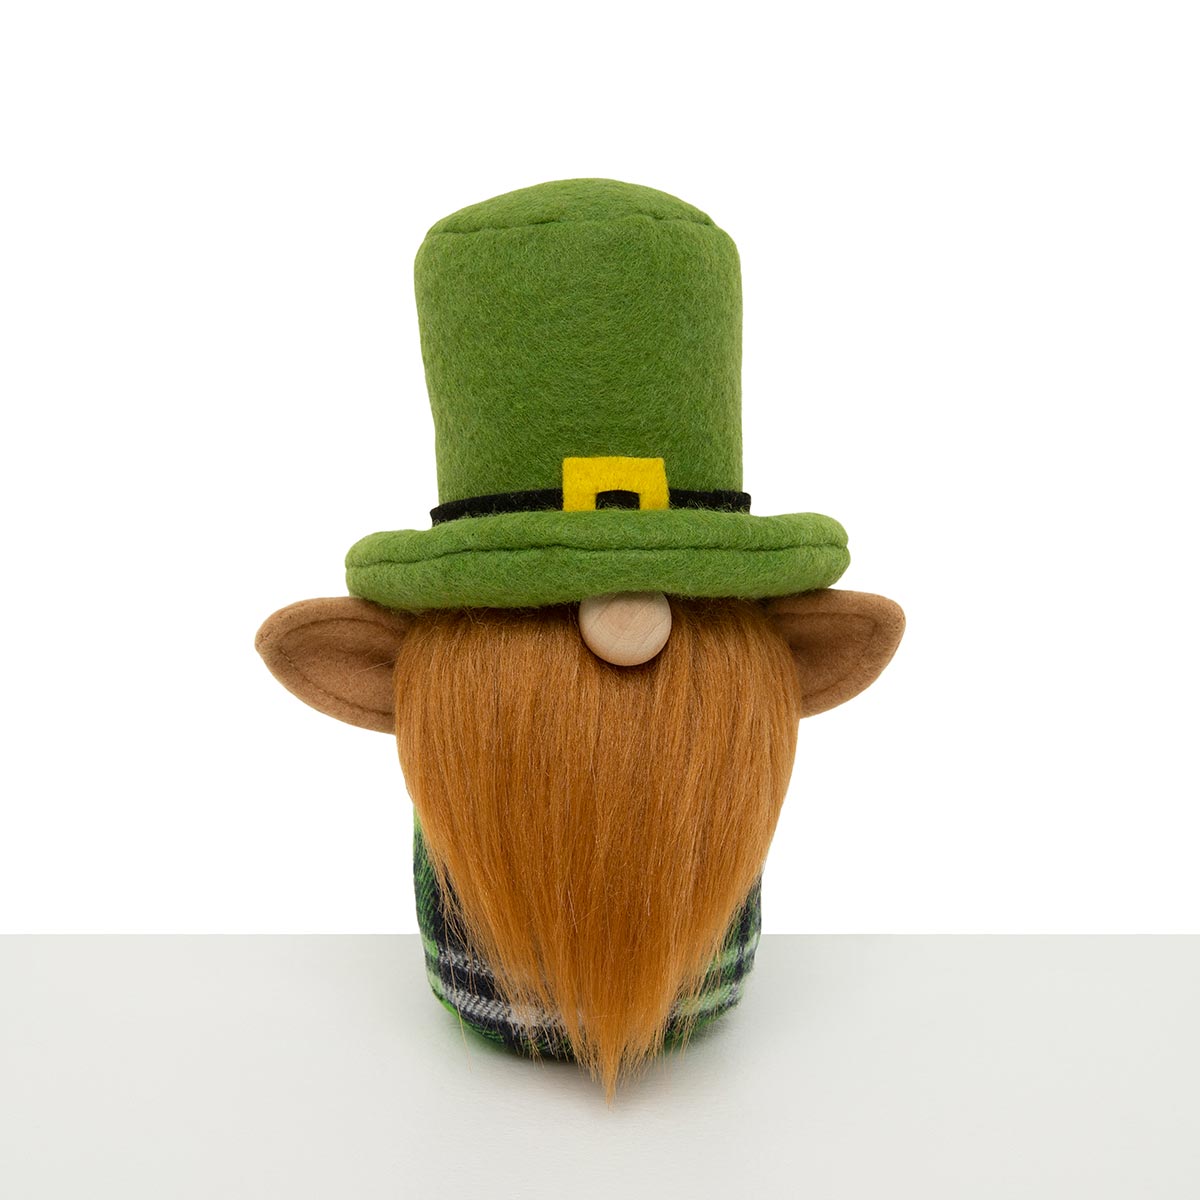 b50 LEPRECHAUN GNOME GREEN WITH BUCKLE HAT, WOOD NOSE,